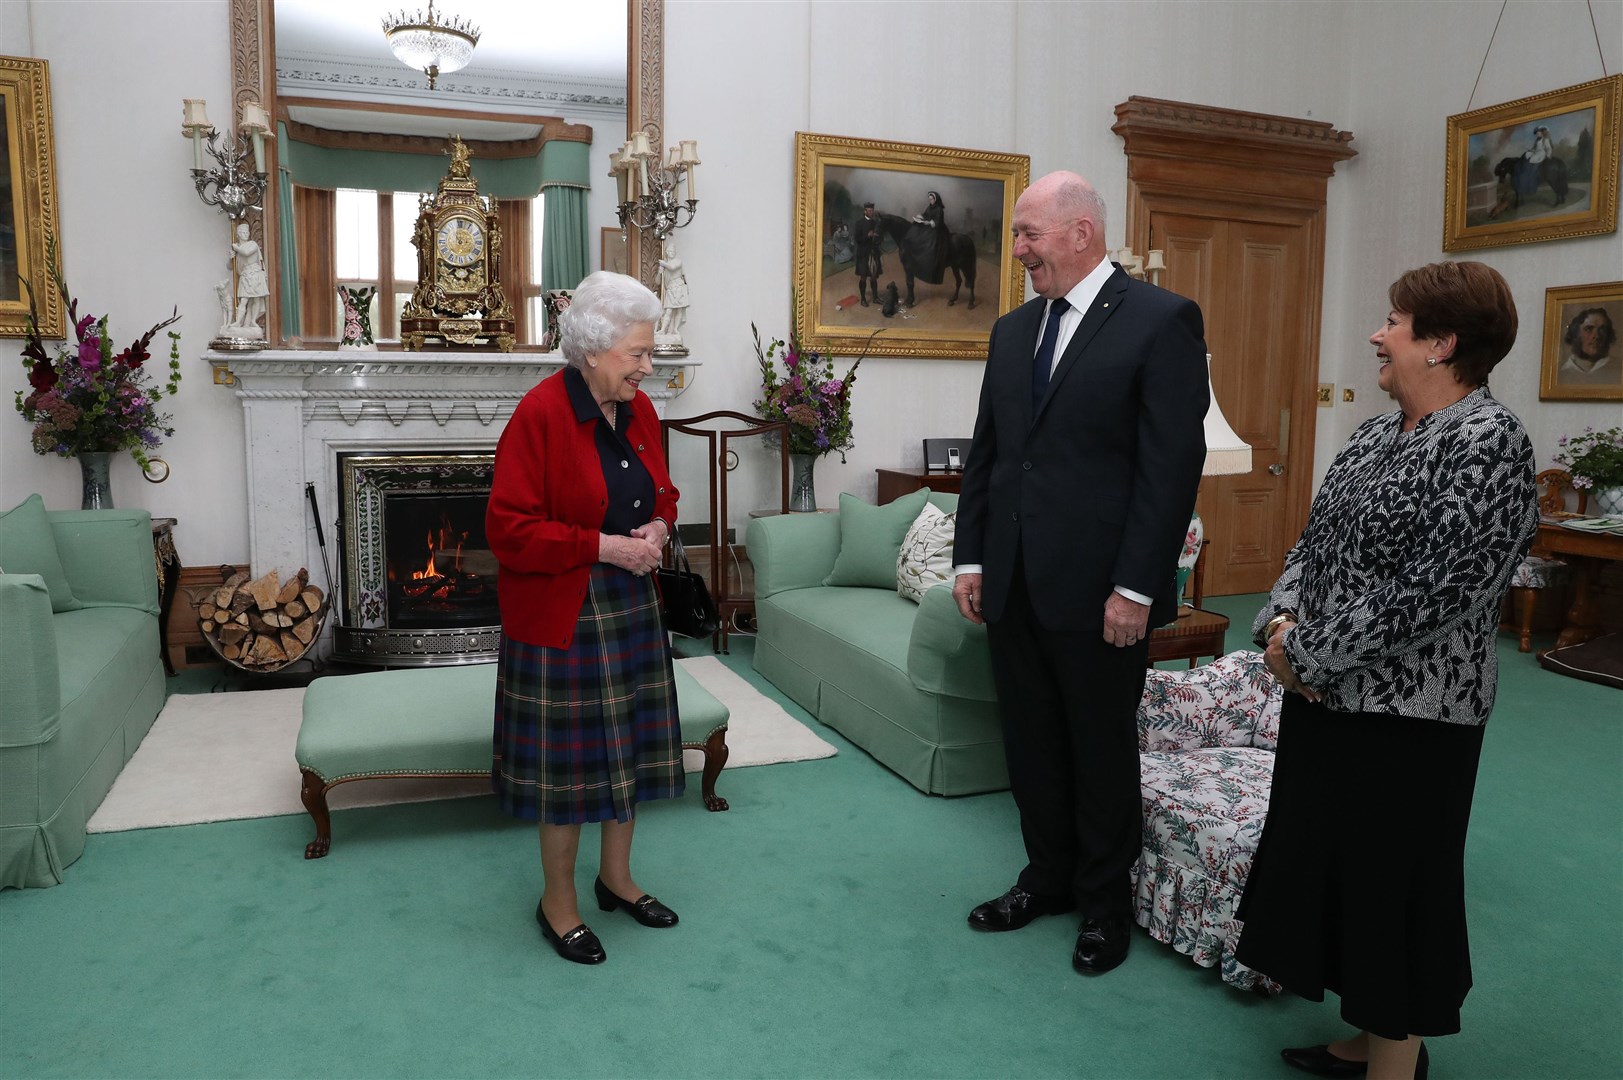 The Queen will hold the audiences with Boris Johnson and Liz Truss in the Drawing Room at Balmoral Castle (Andrew Milligan/PA)